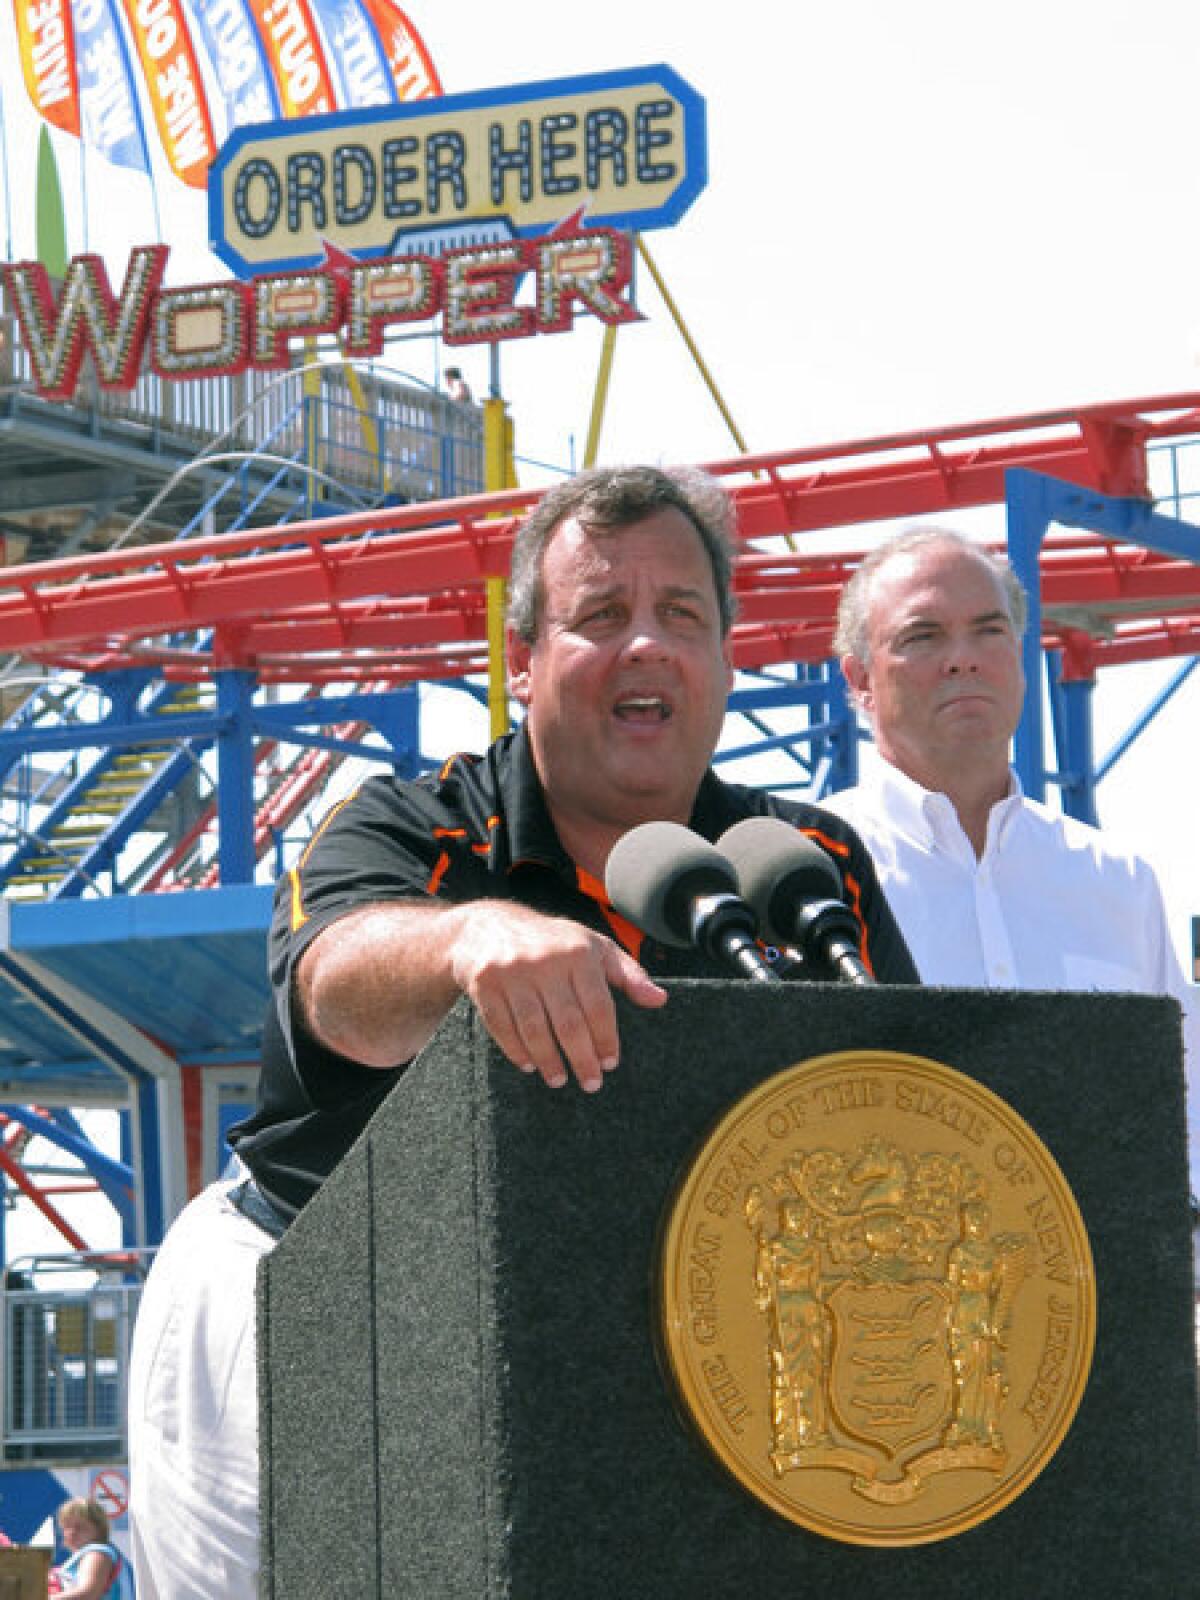 New Jersey Gov. Chris Christie touts the state's recovery from Hurricane Sandy on the boardwalk in North Wildwood.